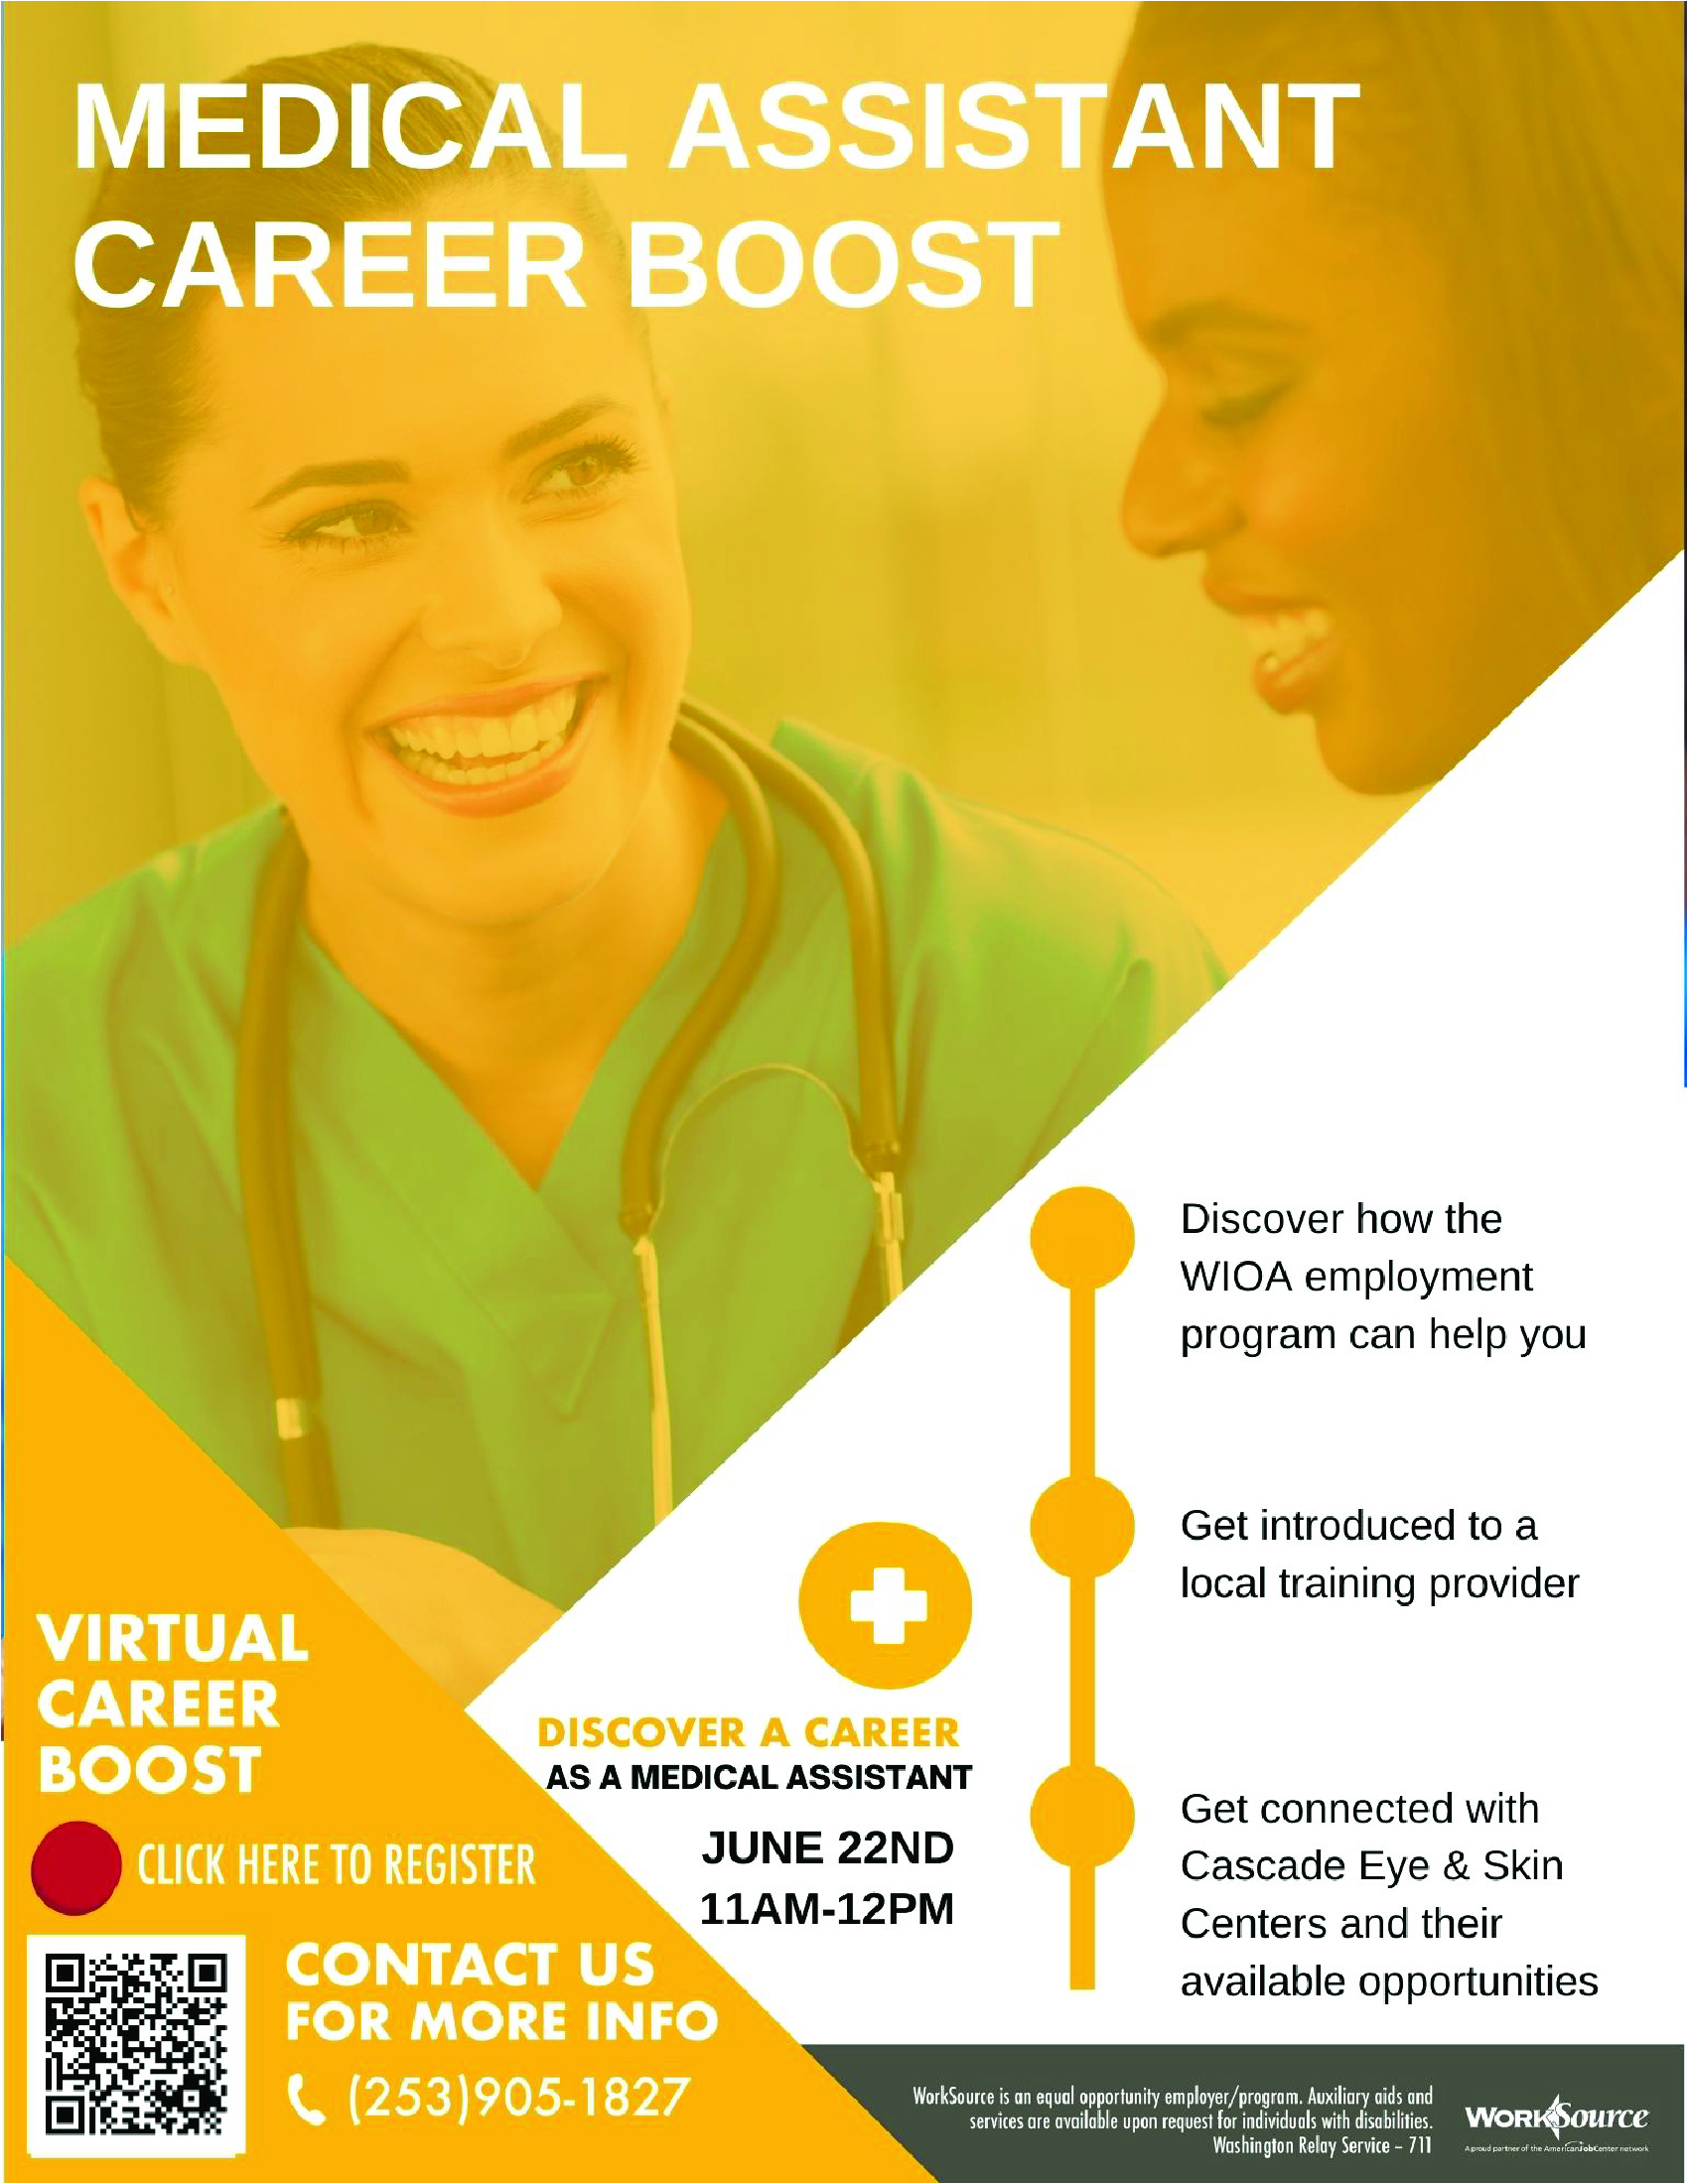 Medical Assistant Career Boost with Cascade Eye & Skin - June 22nd 2